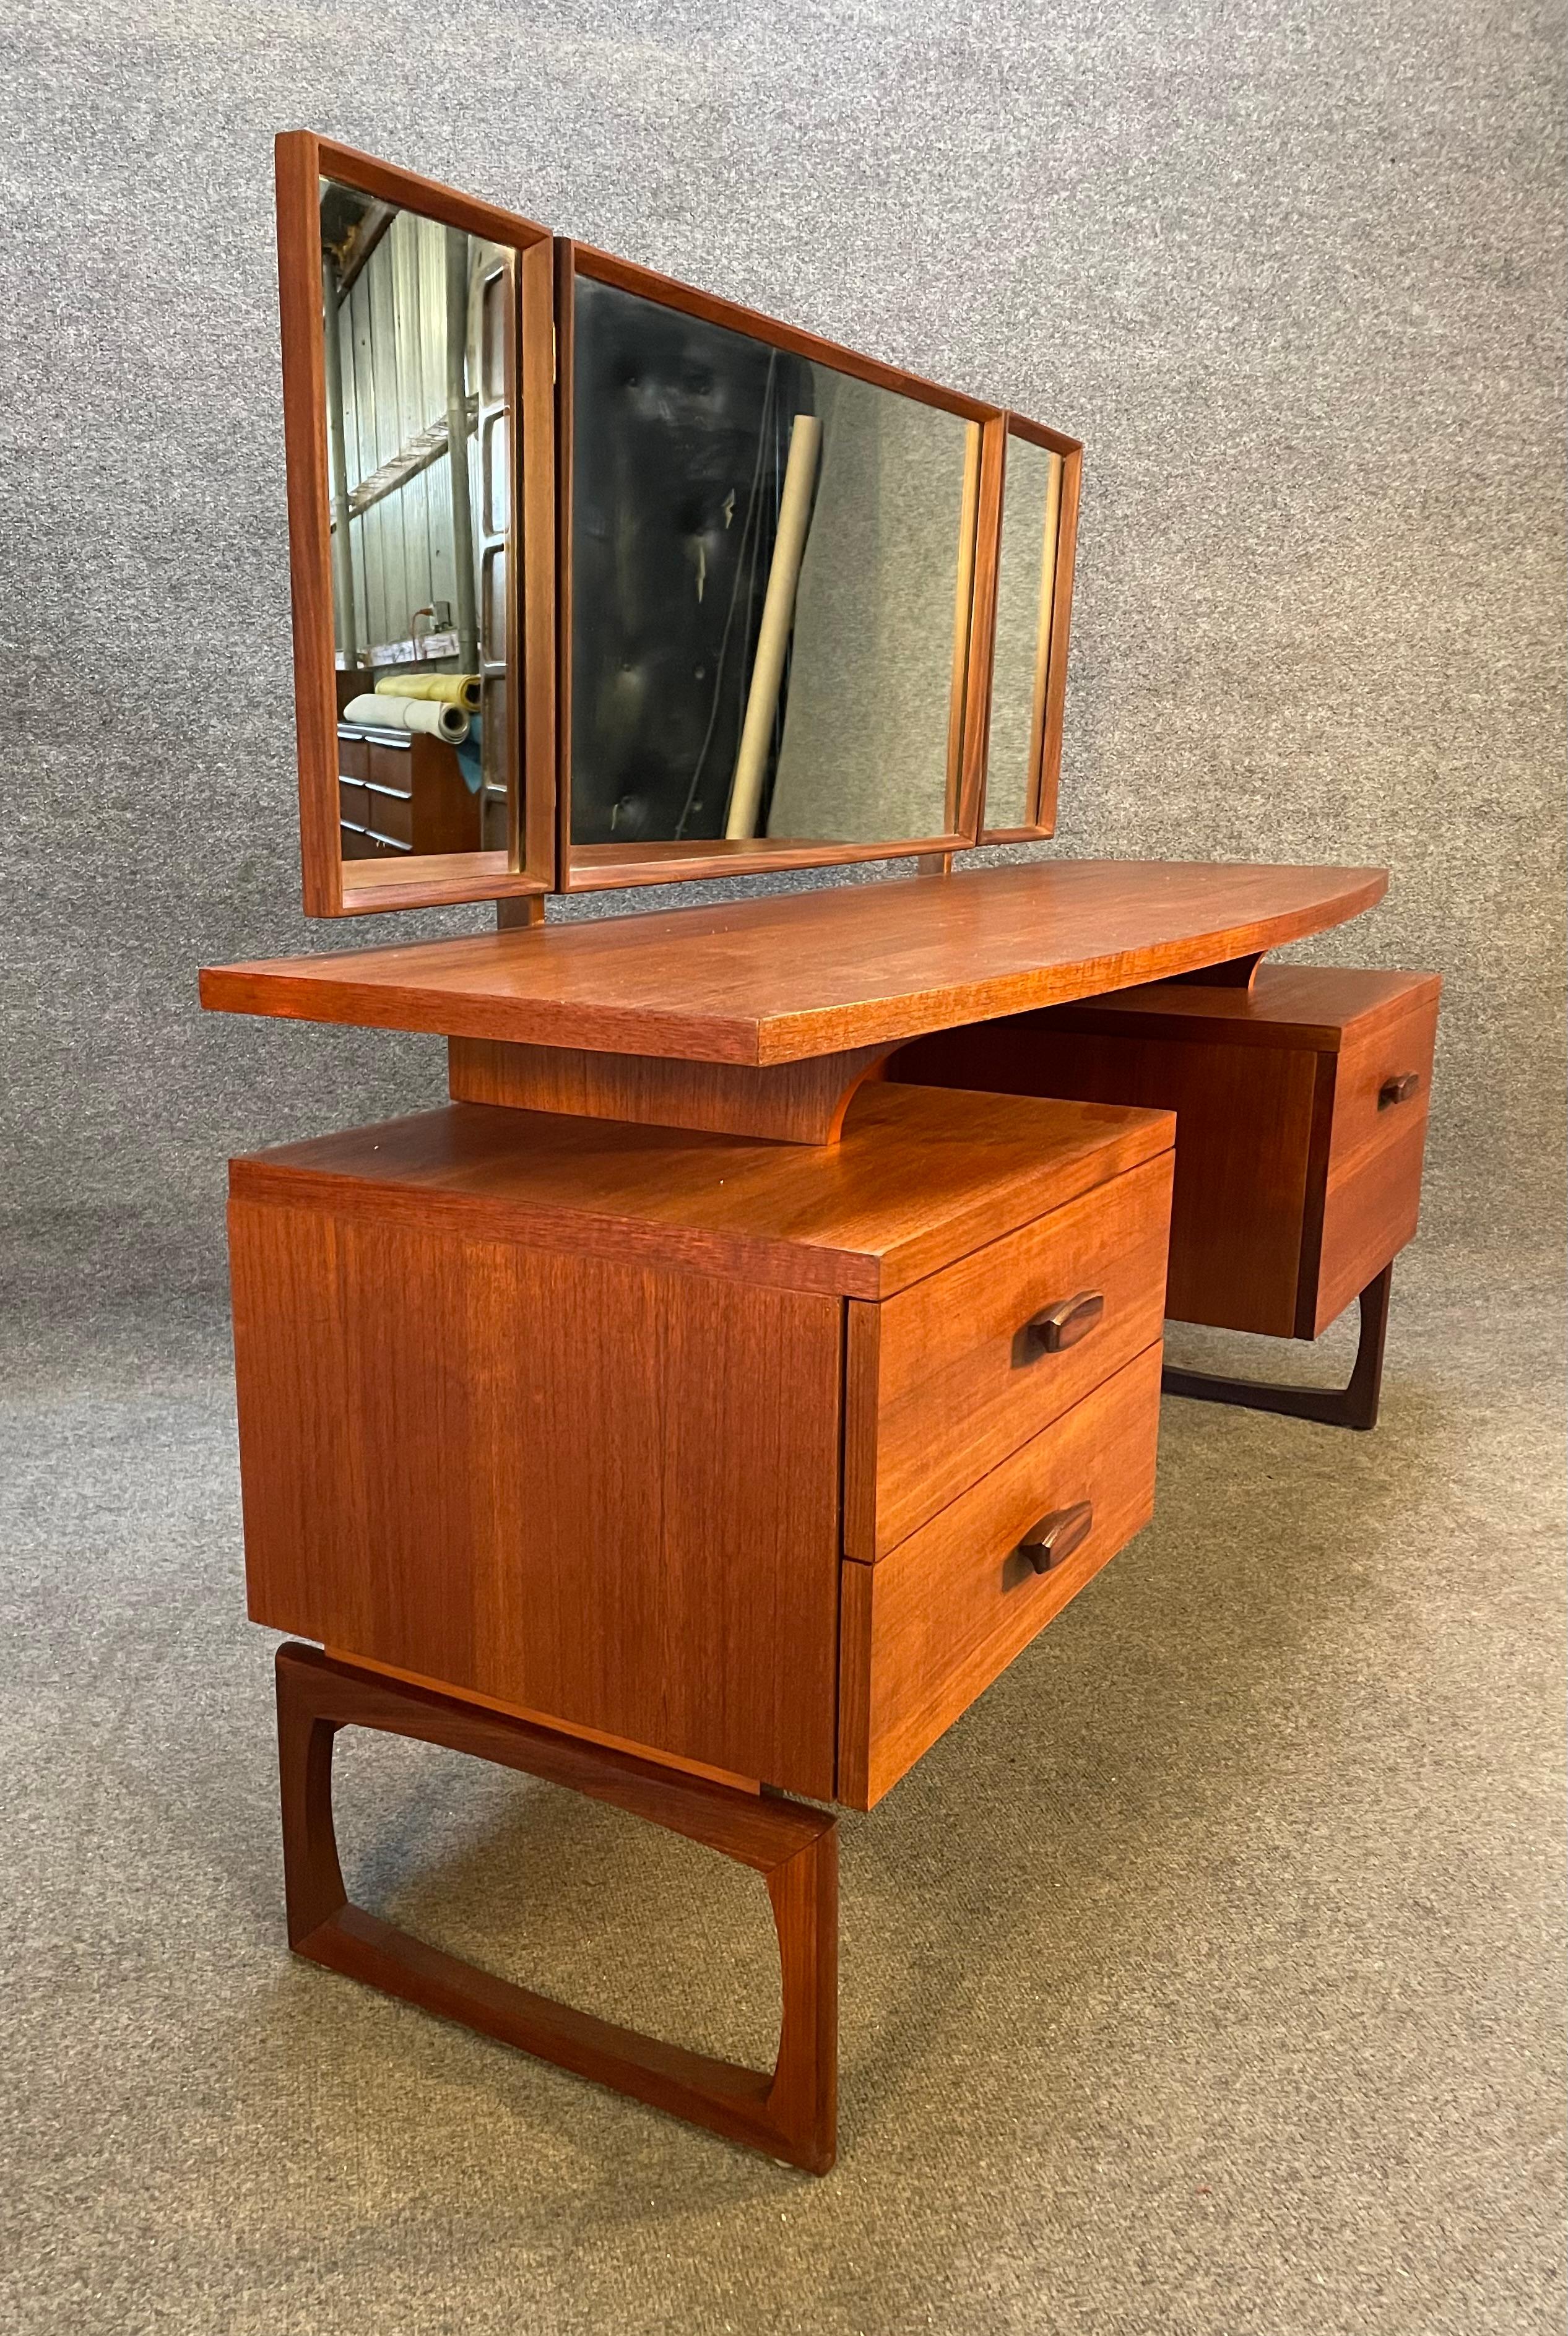 Here is beautiful Mid-Century Modern teak vanity - dressing table in teak wood designed by R. Bennett and manufactured by G Plan in England in the 1960's.
This exquisite piece, recently imported from the UK to California before its refinishing,